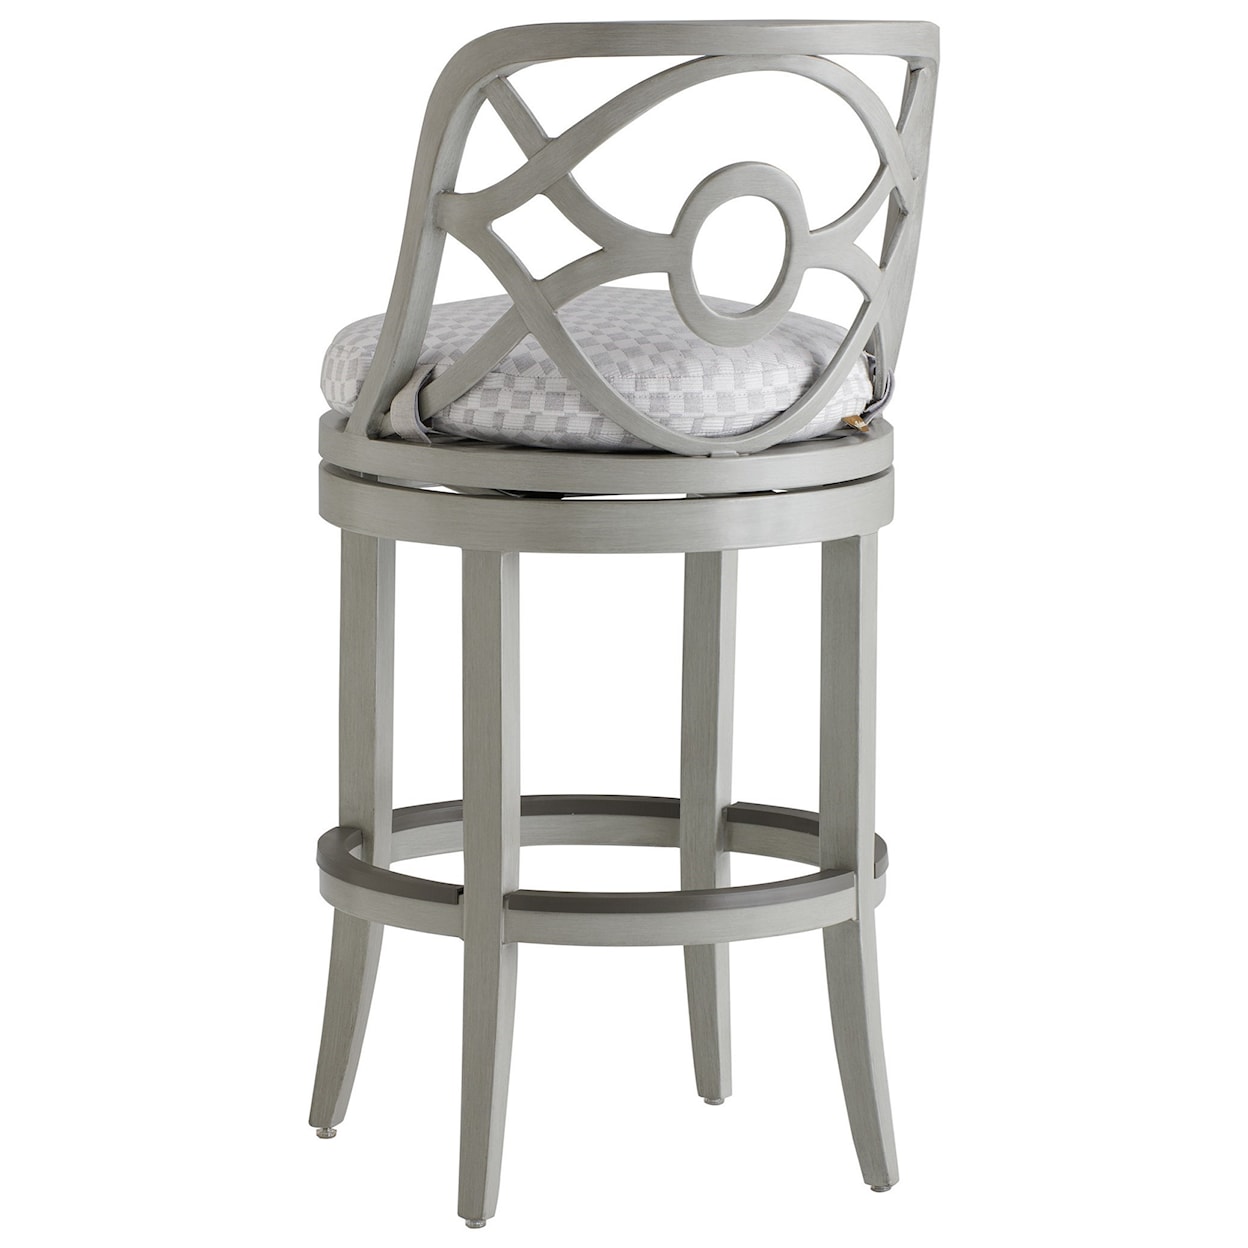 Tommy Bahama Outdoor Living Silver Sands Swivel Bar Stool